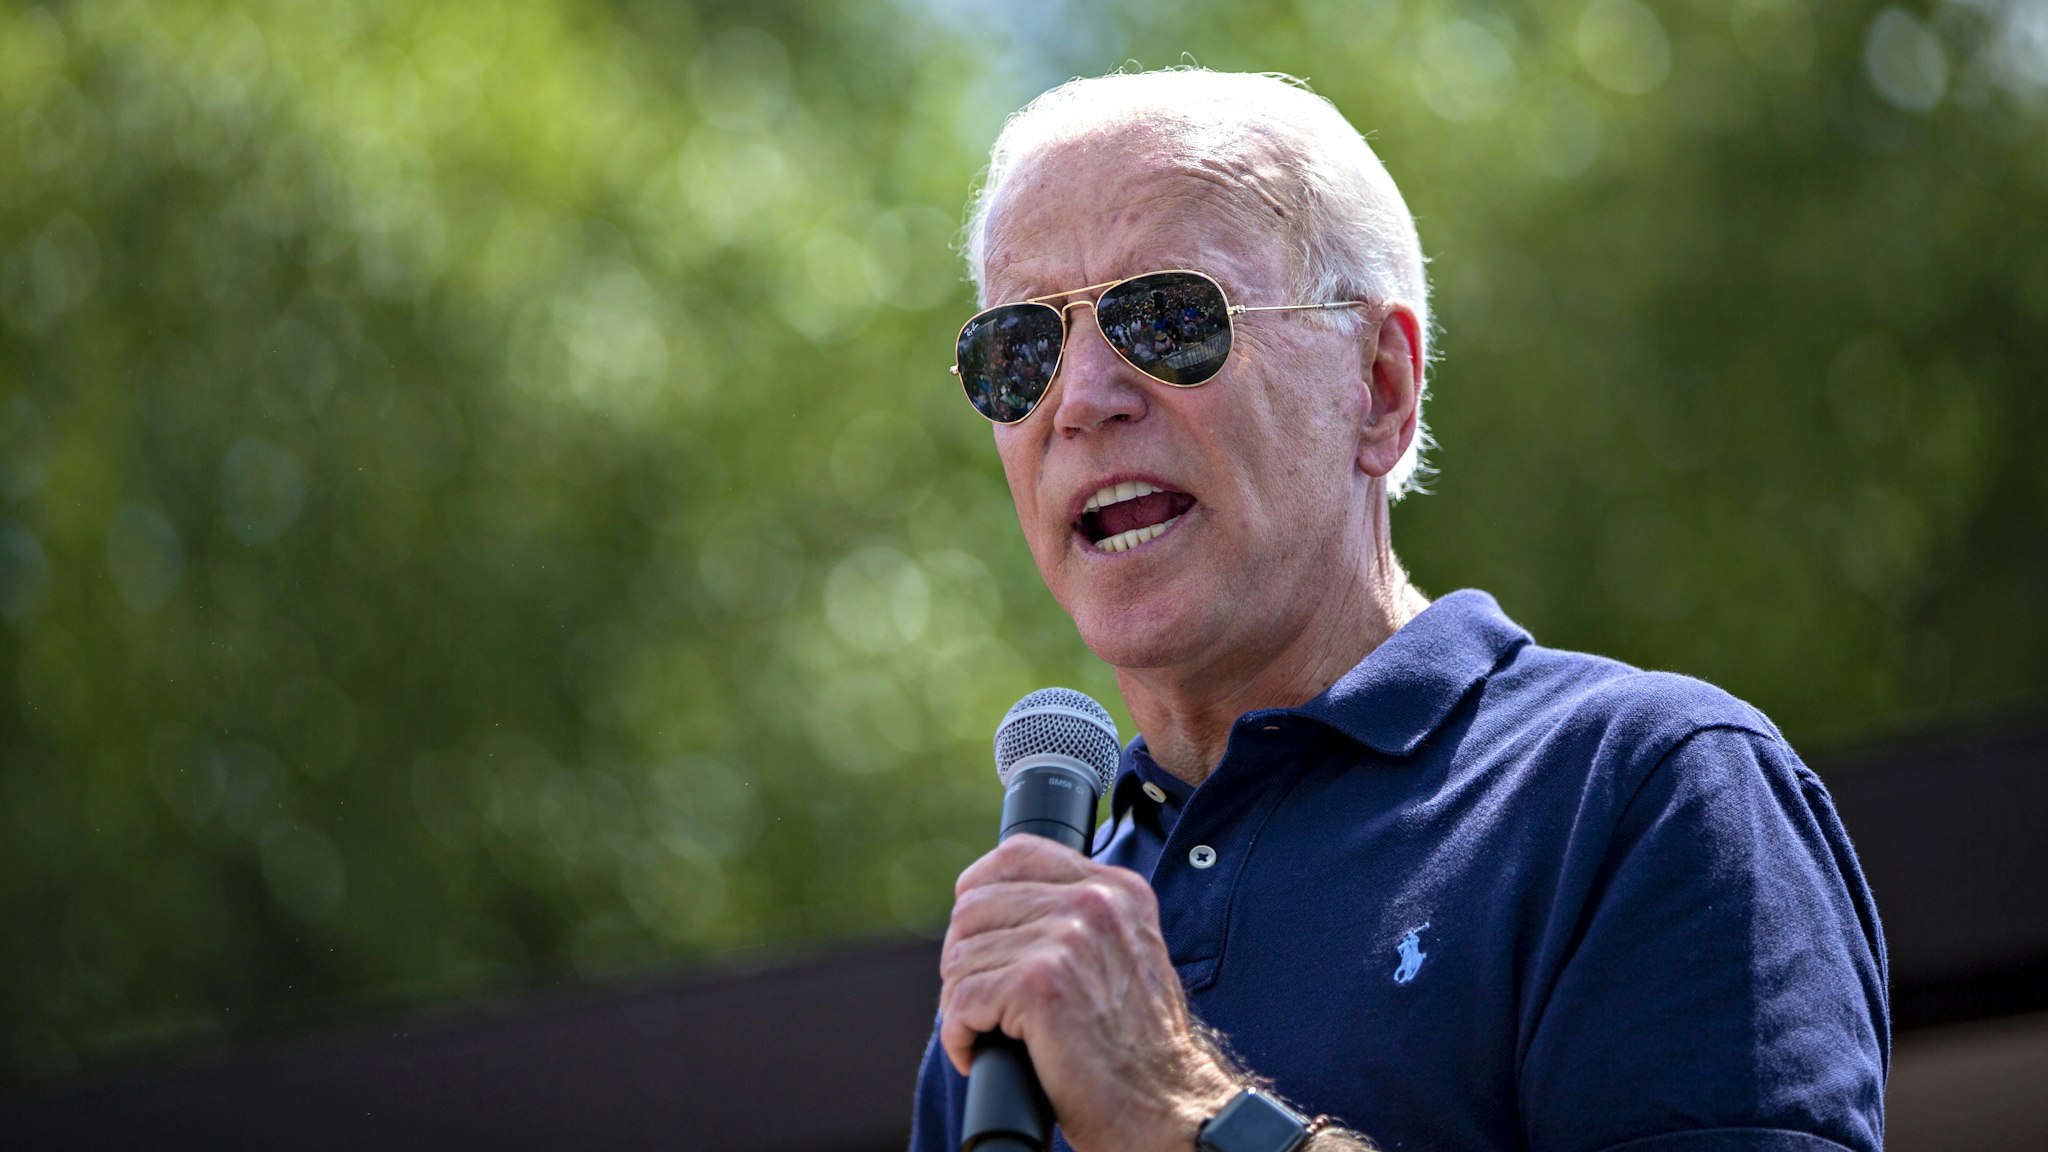 Former U.S. Vice President Joe Biden, 2020 Democratic presidential candidate, speaks at the Des Moines Register Political Soapbox during the Iowa State Fair in Des Moines, Iowa, U.S., on Thursday, Aug. 8, 2019. After speaking, the former vice president didn't explicitly call Trump a white supremacist, but said he tries to curry favor with them.